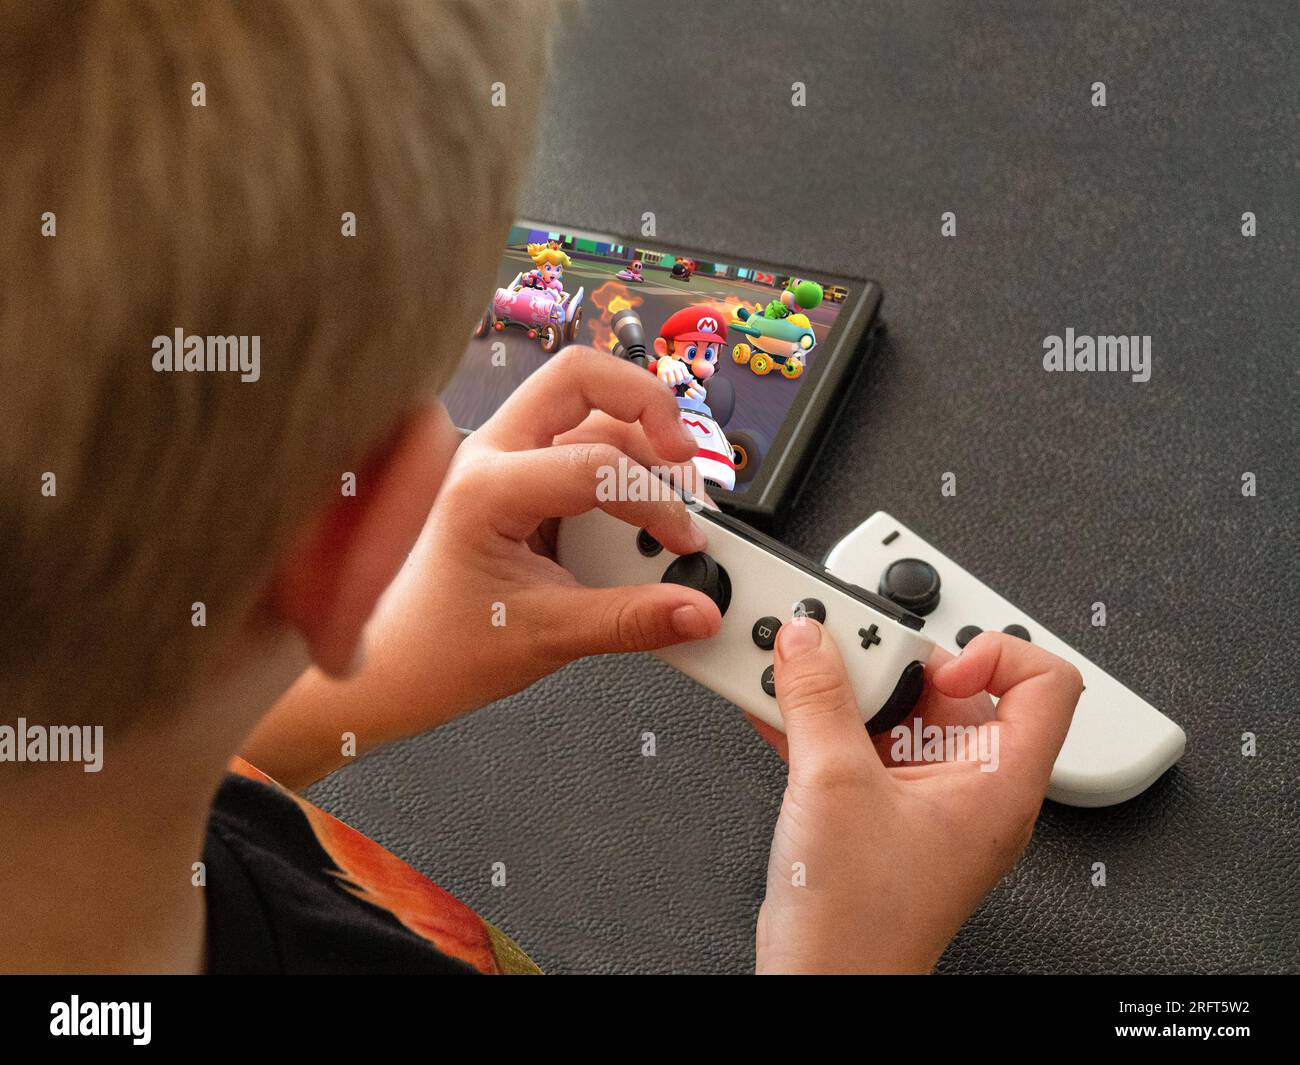 Young boy playing Mario Kart on a popular new Nintendo Switch console in handheld mode. Close up image on hands. Copenhagen, Denmark - August 5, 2023. Stock Photo